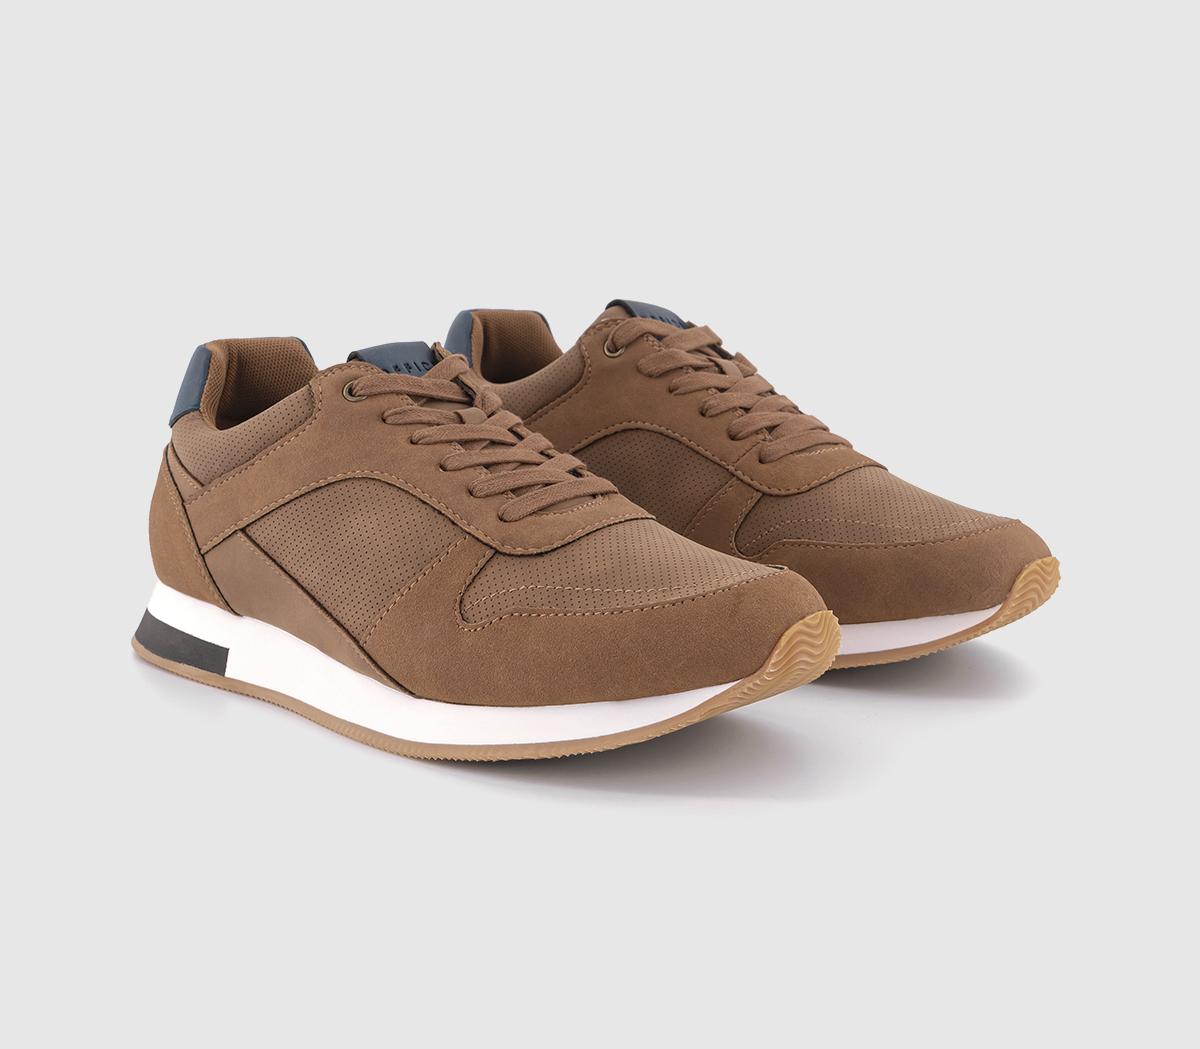 OFFICE Mens Cassidy Lightweight Trainers Tan, 7